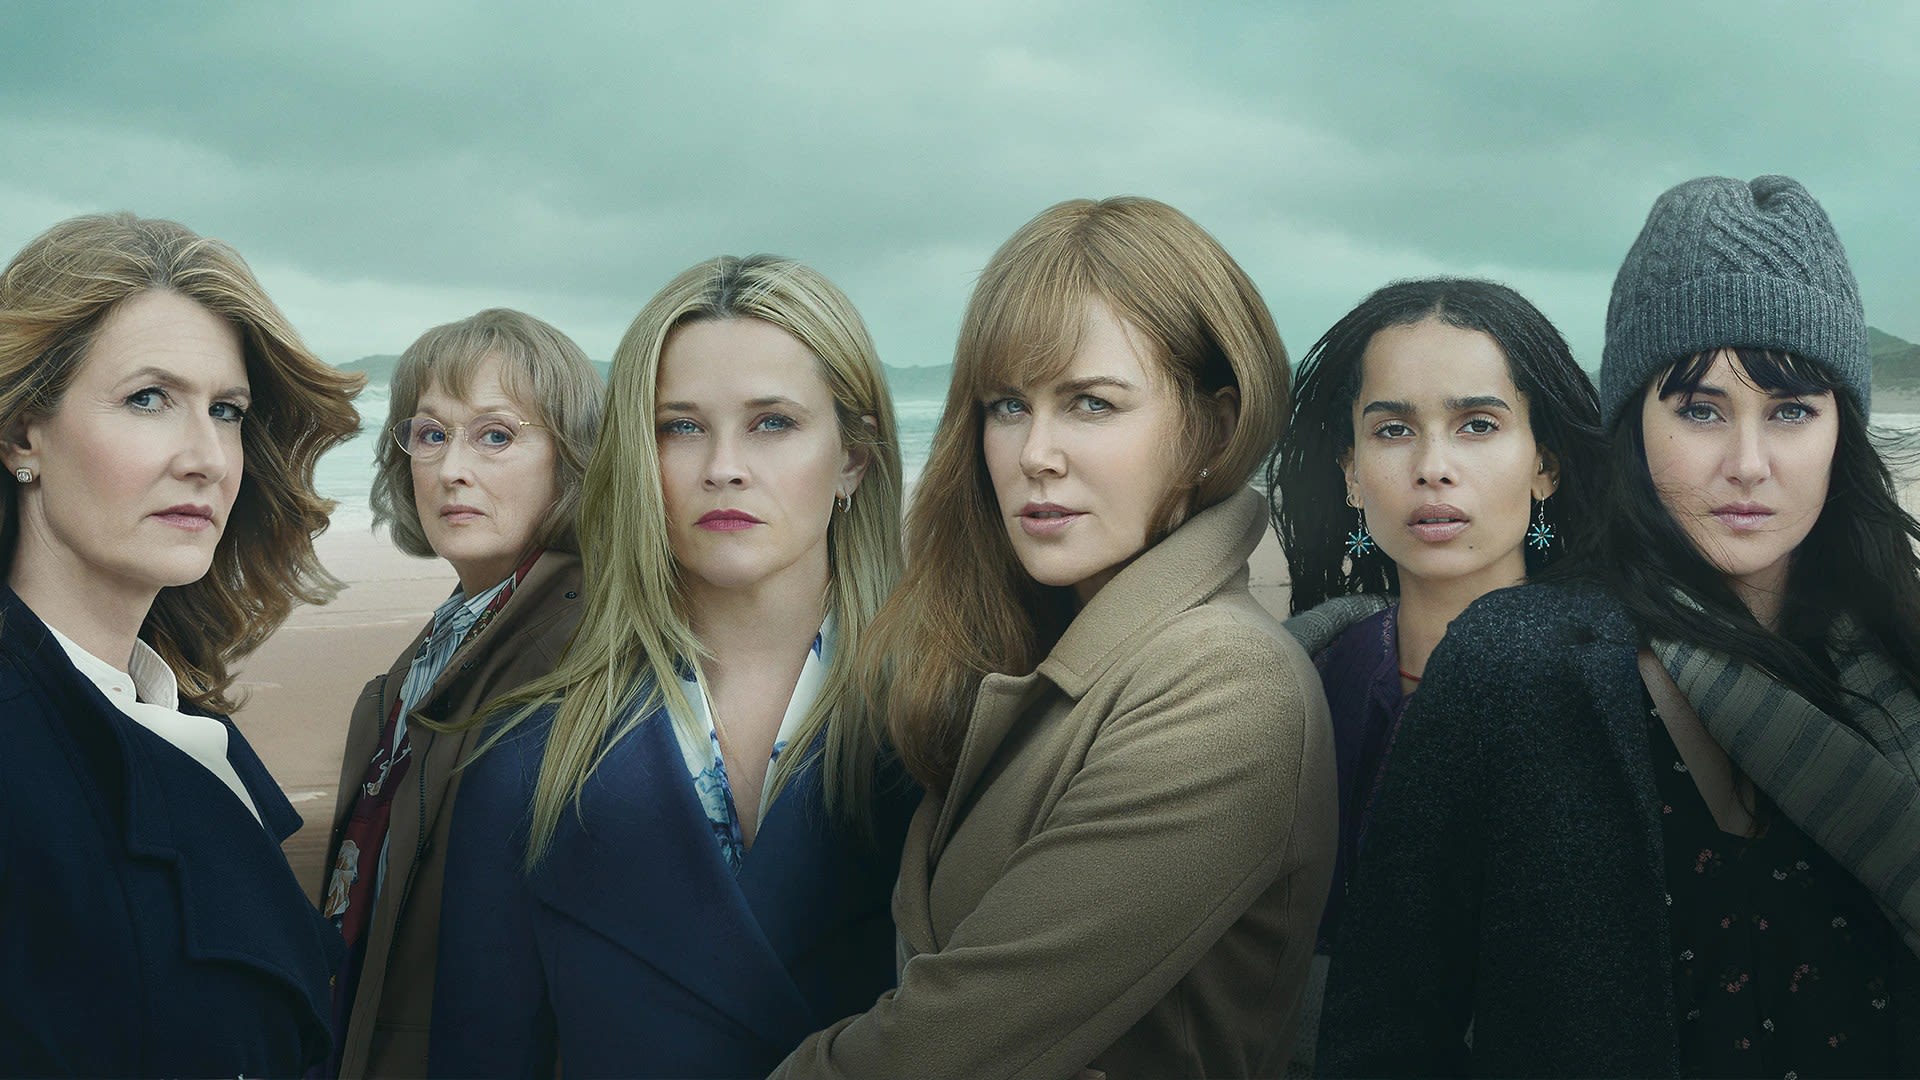 Nicole Kidman Says ‘Big Little Lies’ Season 3 Is in ‘Good Shape’ and Moving Ahead ‘Fast and Furious’: Author Liane Moriarty ‘Is...